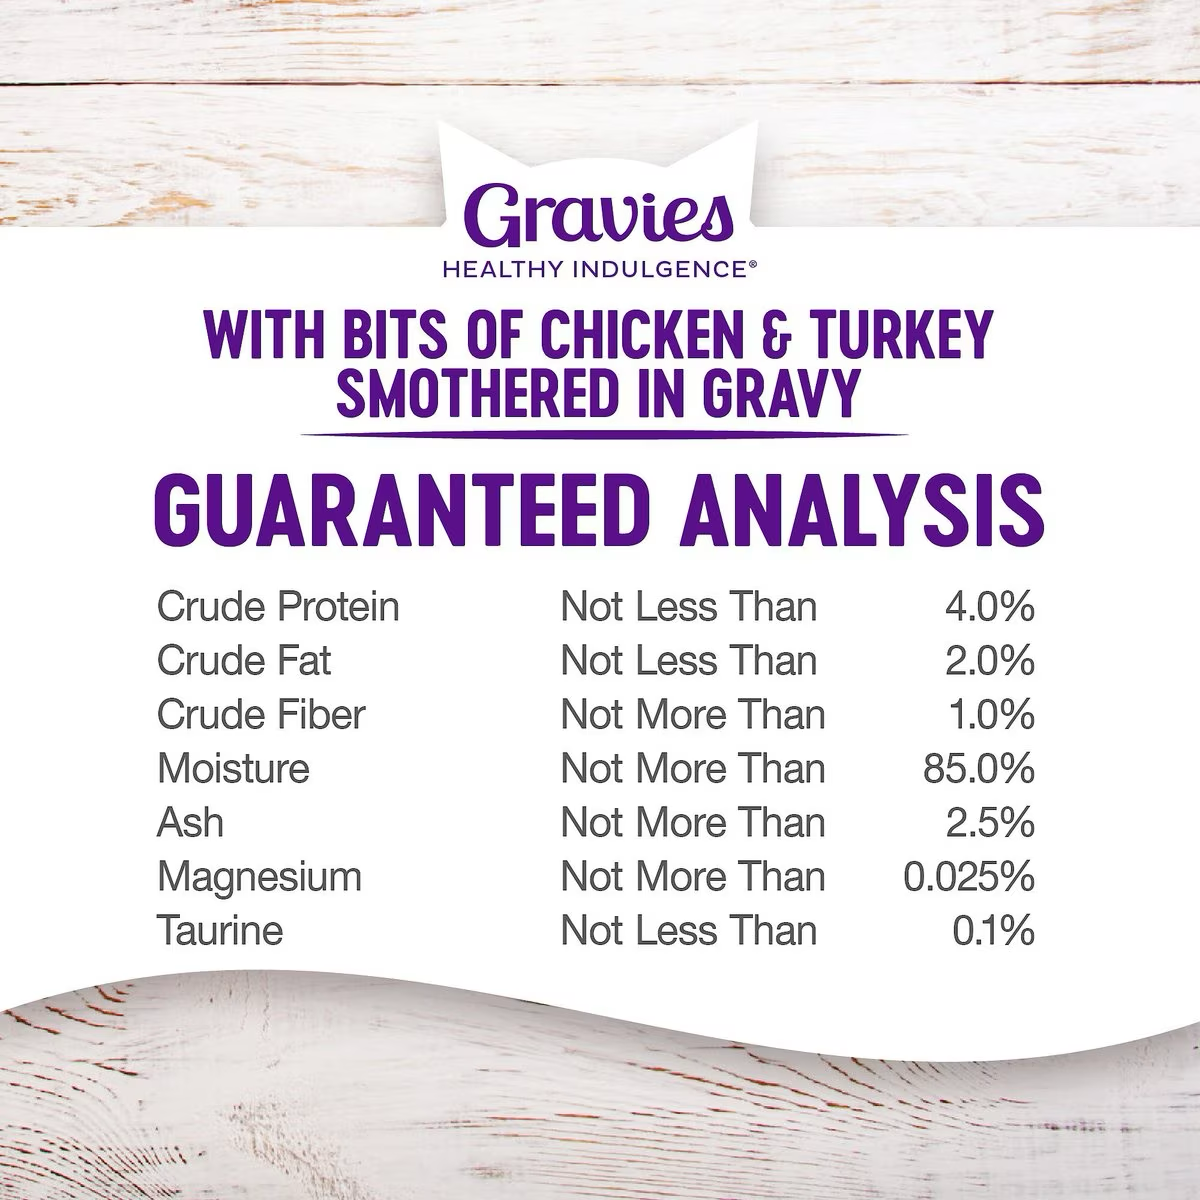 Wellness Healthy Indulgence Gravies Chicken & Turkey Wet Cat Food  Canned Cat Food  | PetMax Canada